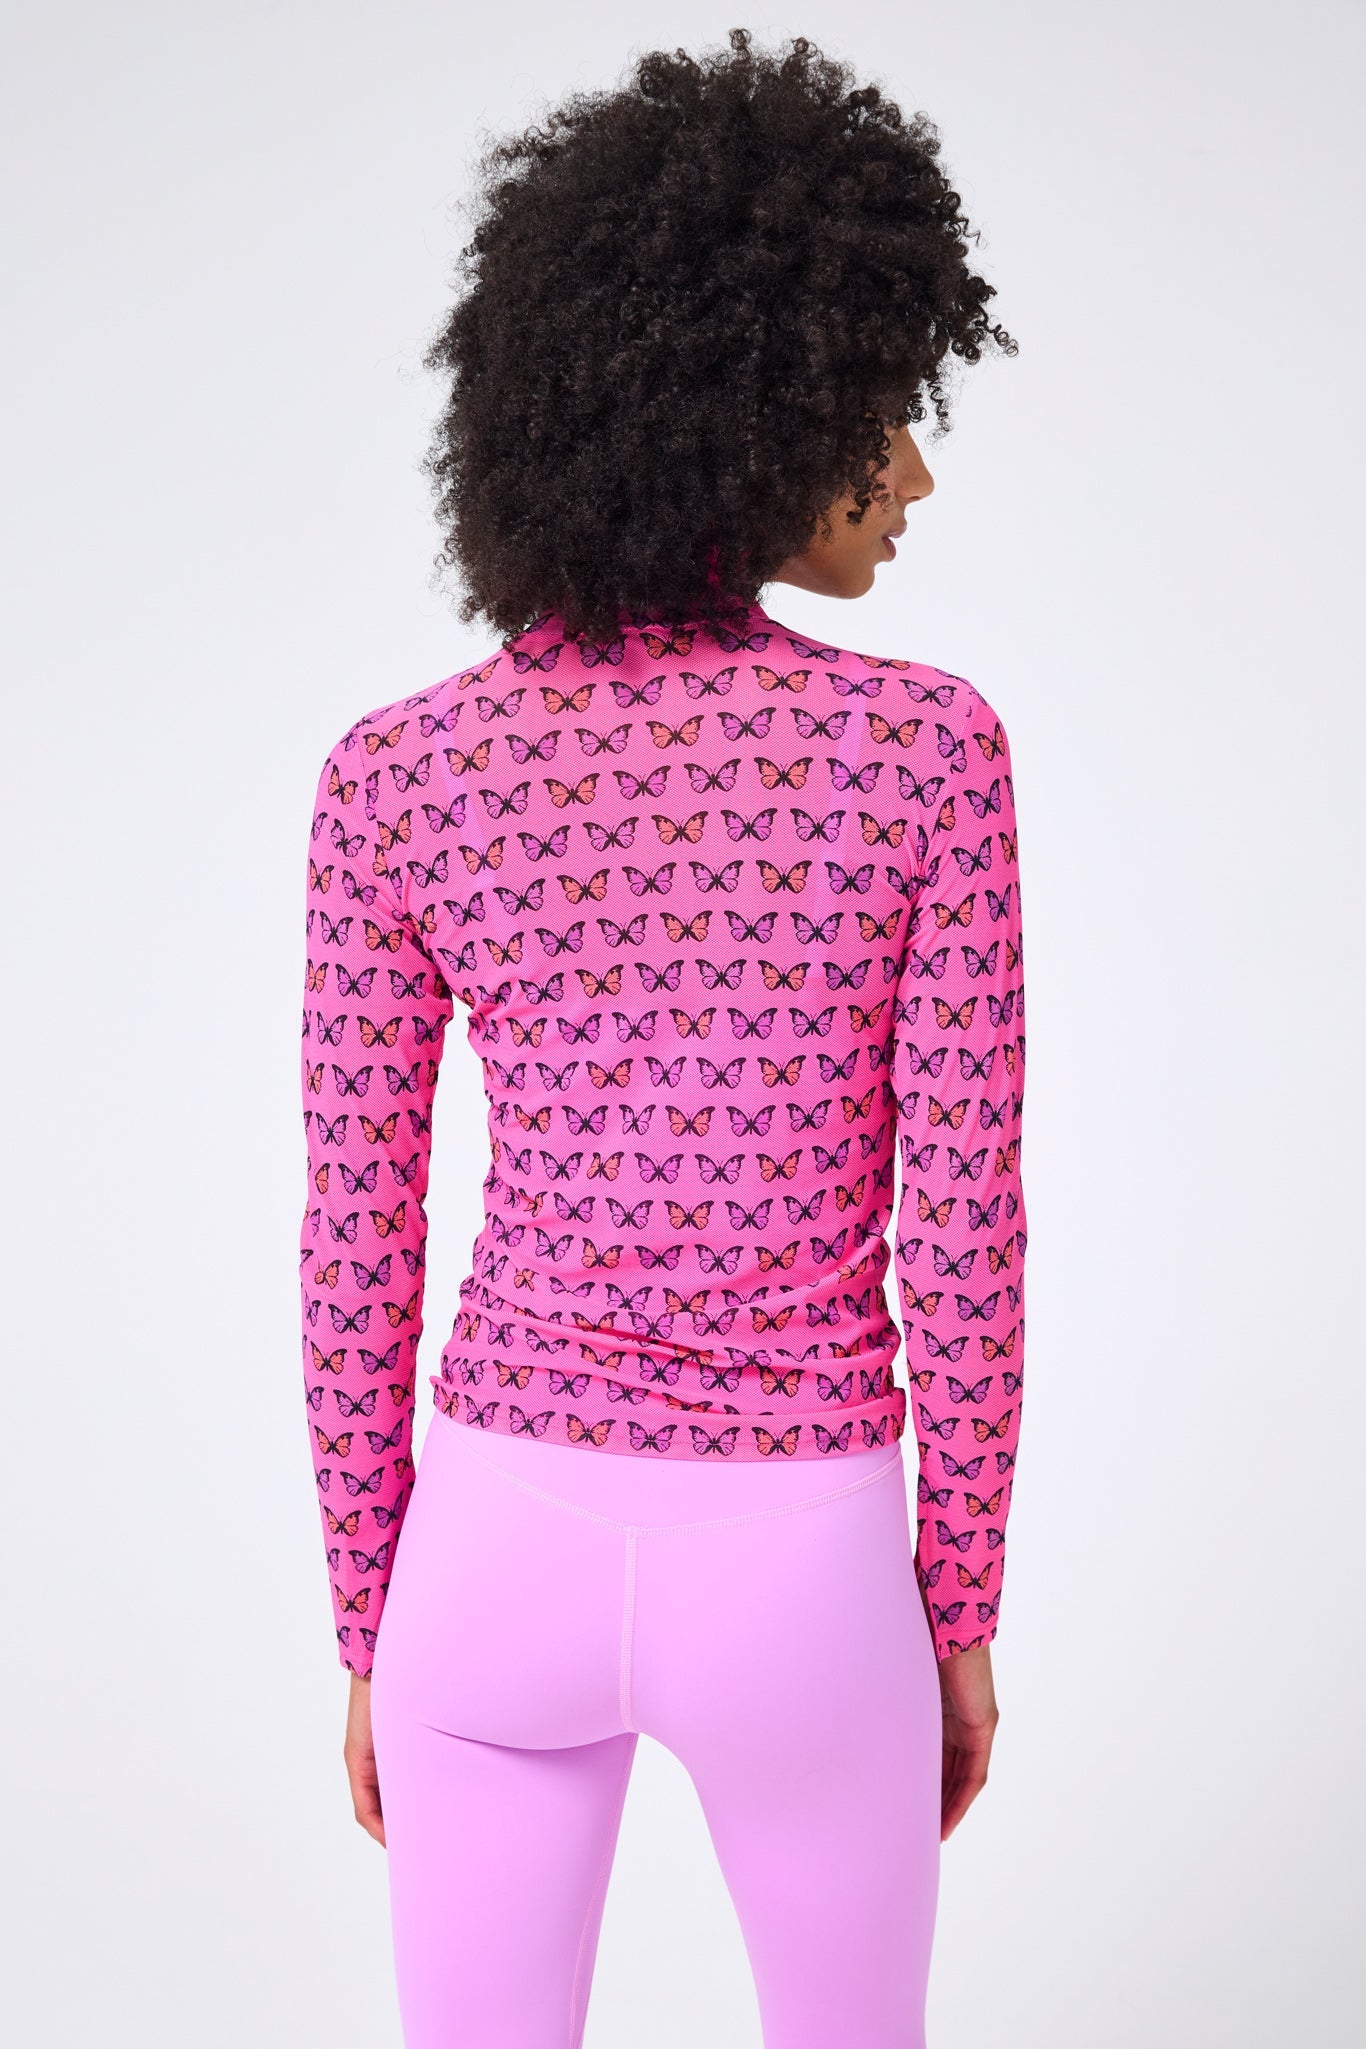 Mesh Mock Neck in Hot Pink Halftone Butterfly